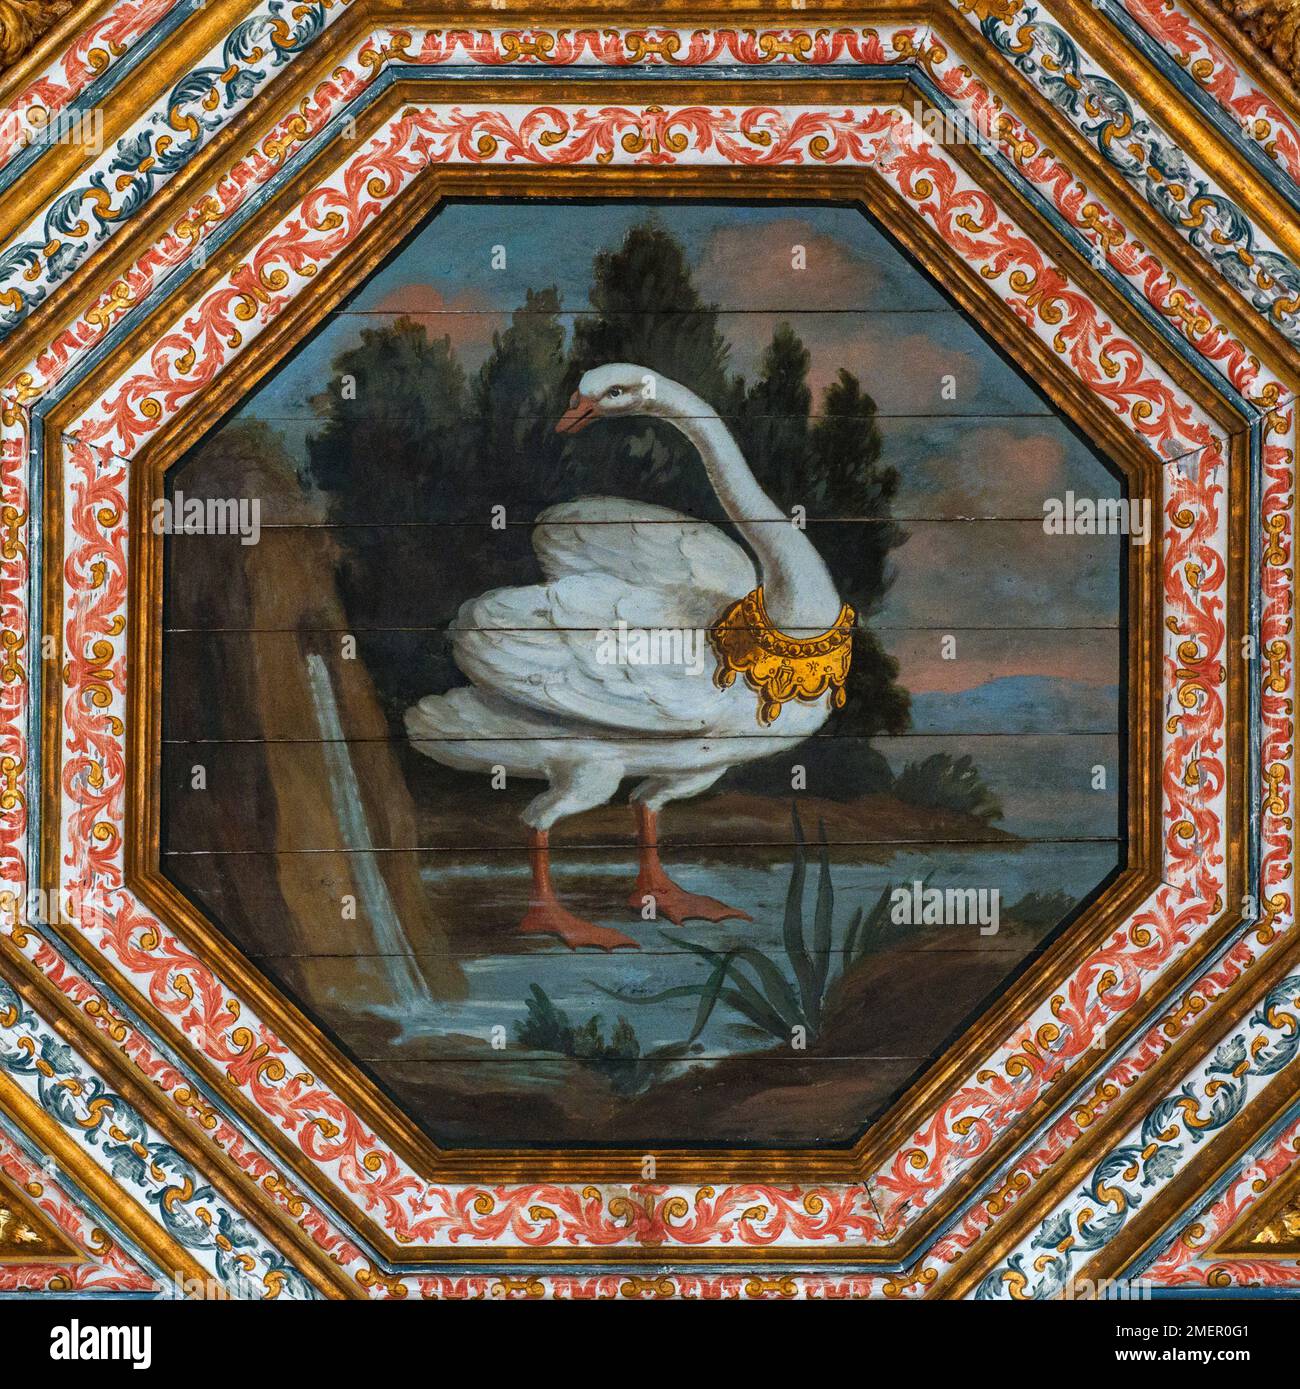 The Room of the Swans: square format view of one of the 30 swans wearing golden crowns around their necks painted in the 1400s on the ceiling of the Sala dos Cisnes in the Palácio Nacional, the royal summer palace at Sintra, near Lisbon, Portugal.  The crowned birds recall England’s Lancastrian royal dynasty and the marriage in 1387 of Philippa of Lancaster to the Portuguese monarch, King John I. Stock Photo